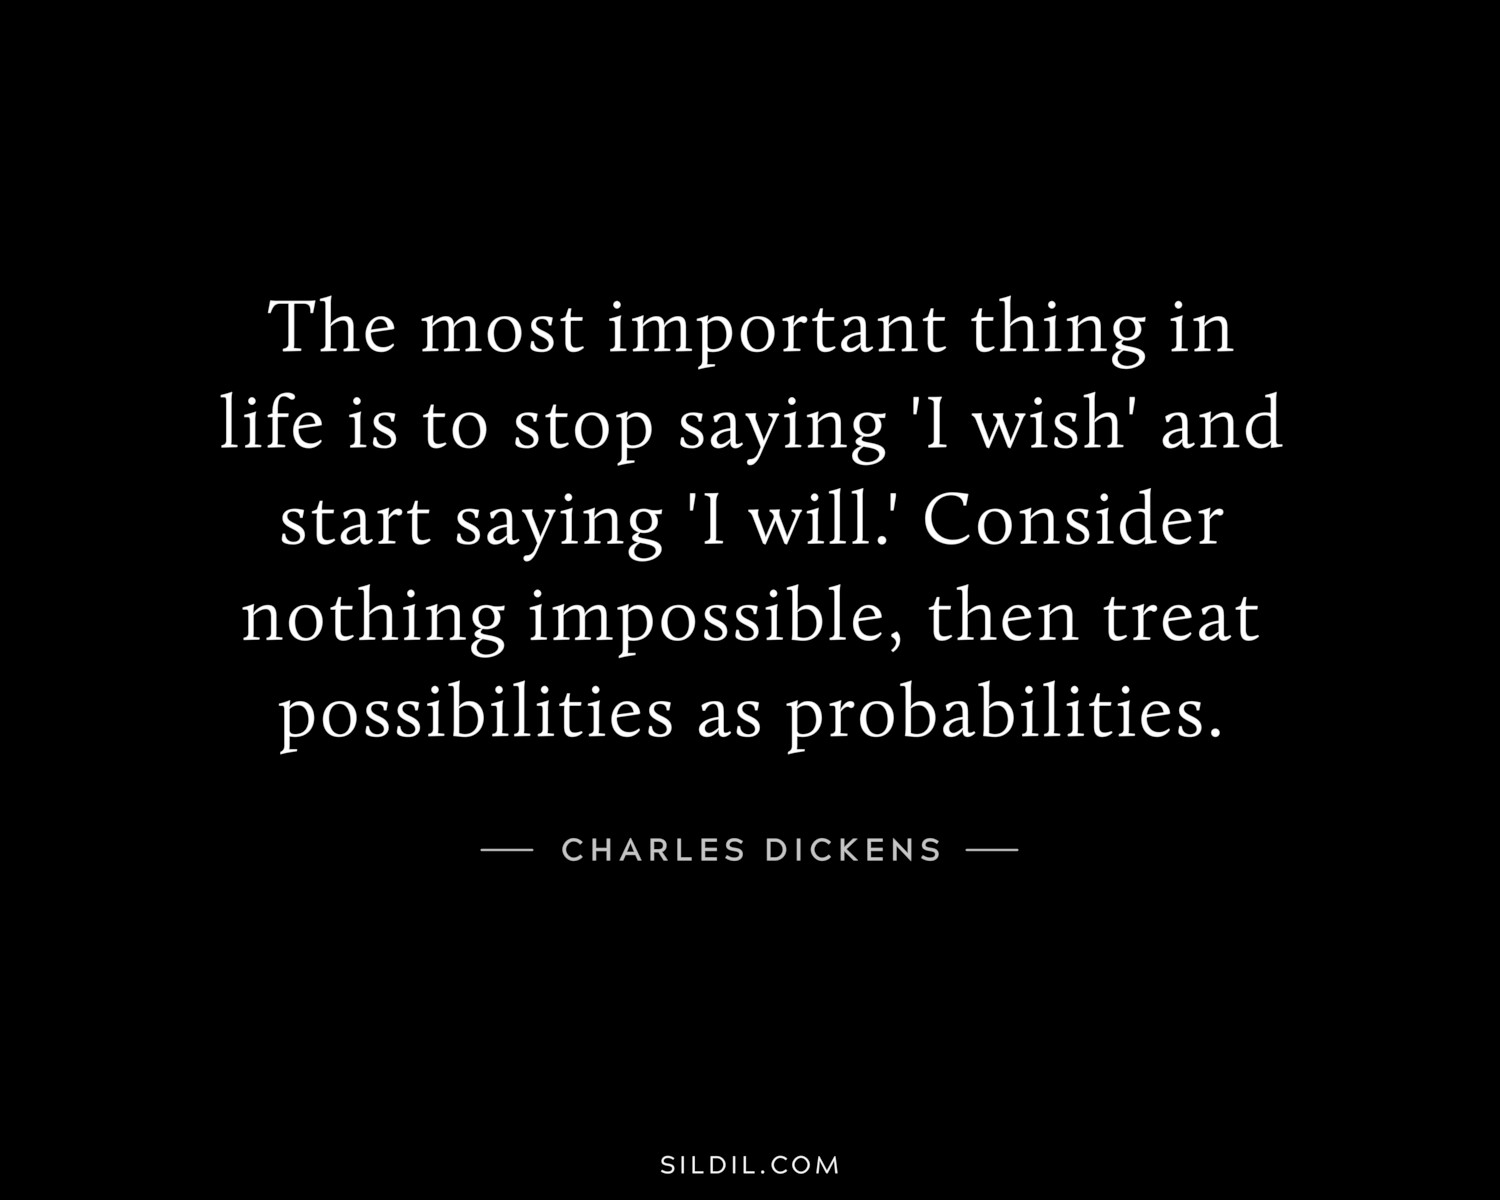 The most important thing in life is to stop saying 'I wish' and start saying 'I will.' Consider nothing impossible, then treat possibilities as probabilities.